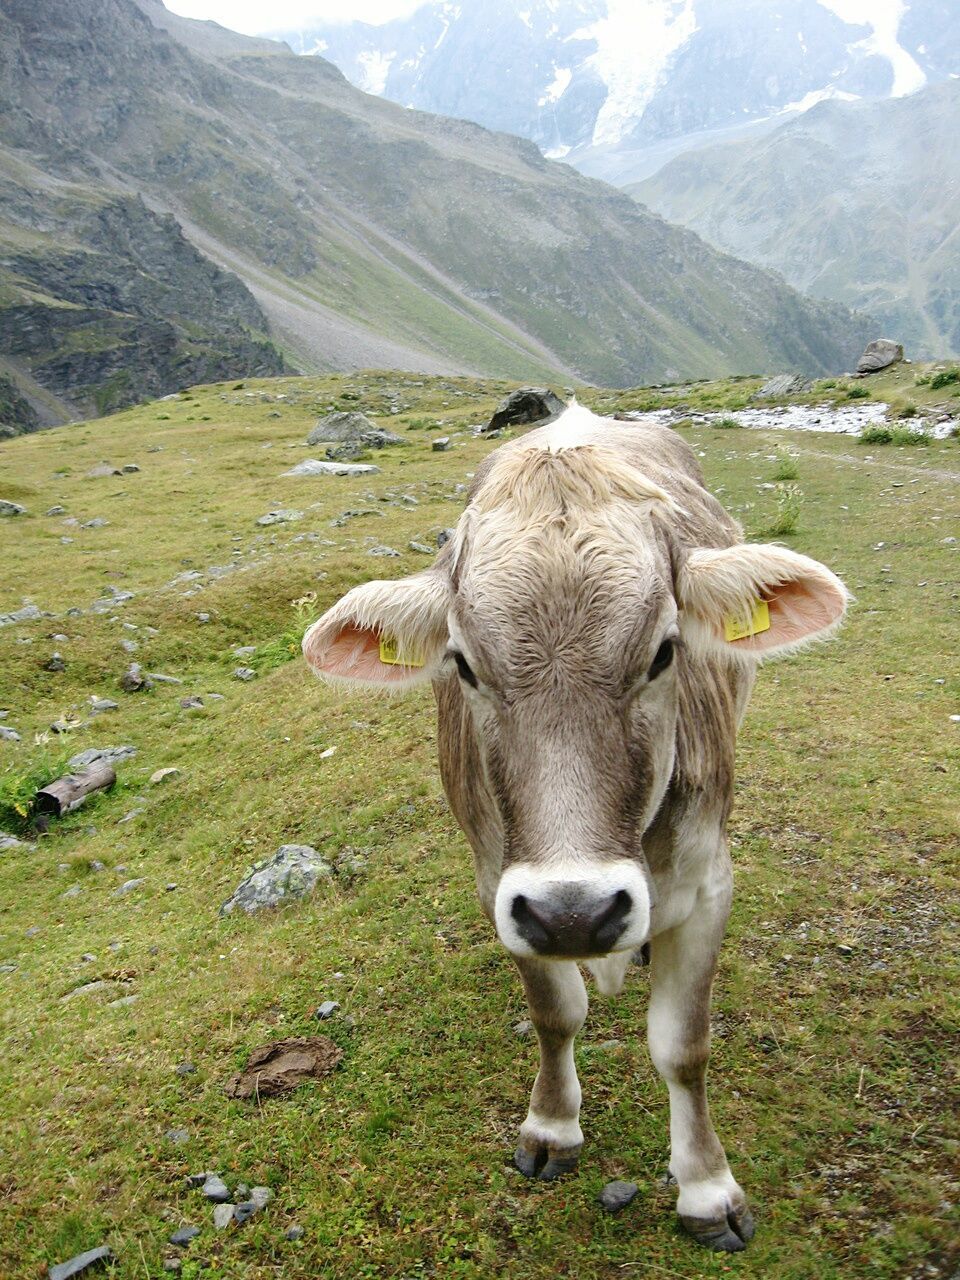 PORTRAIT OF COWS STANDING ON MOUNTAIN